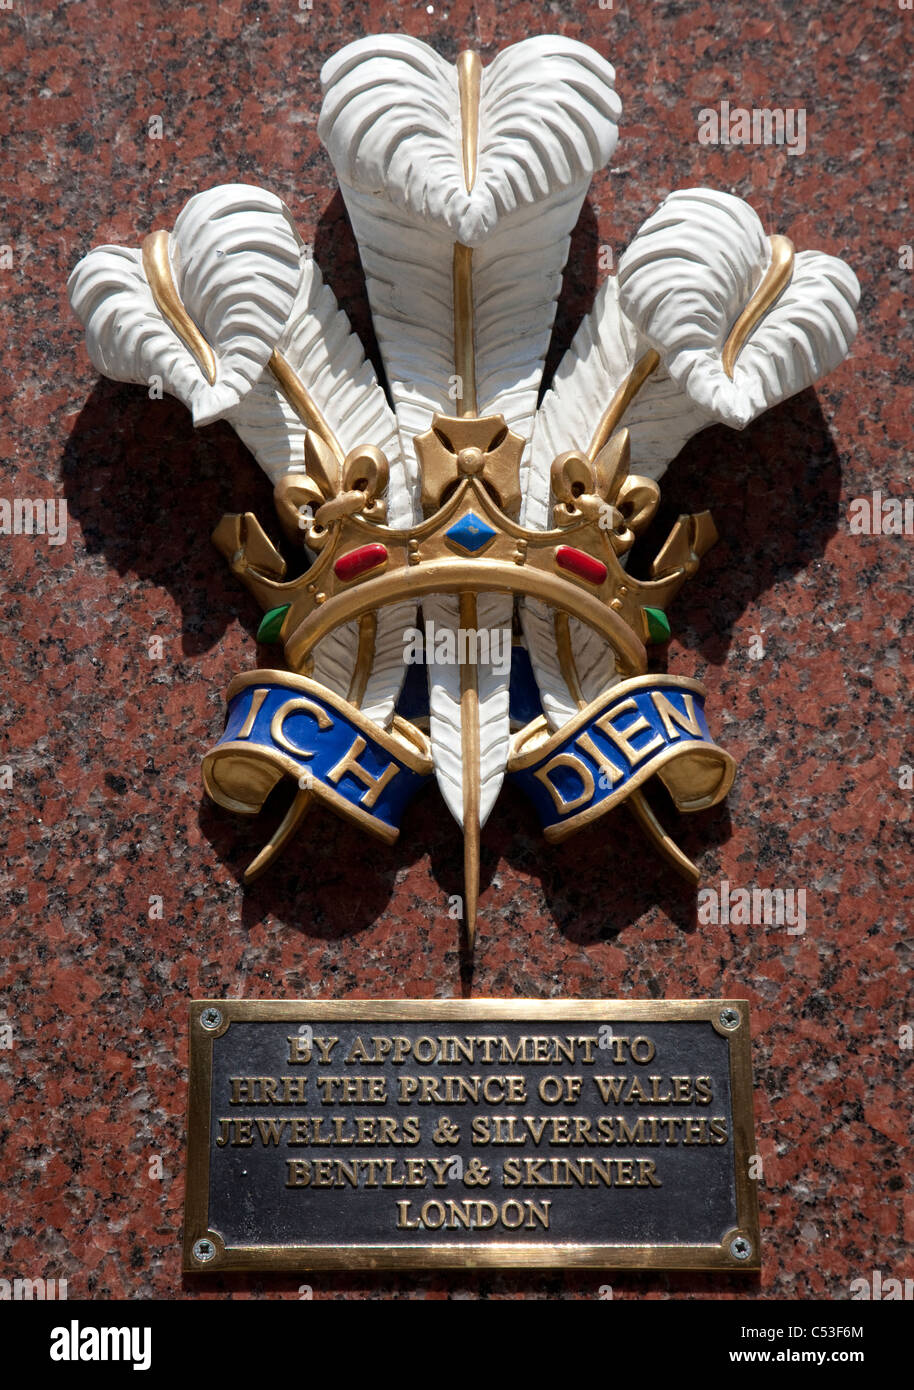 Prince of Wales's feathers and motto Ich Dien (I Serve) on Bentley & Skinner jewellers, London Stock Photo